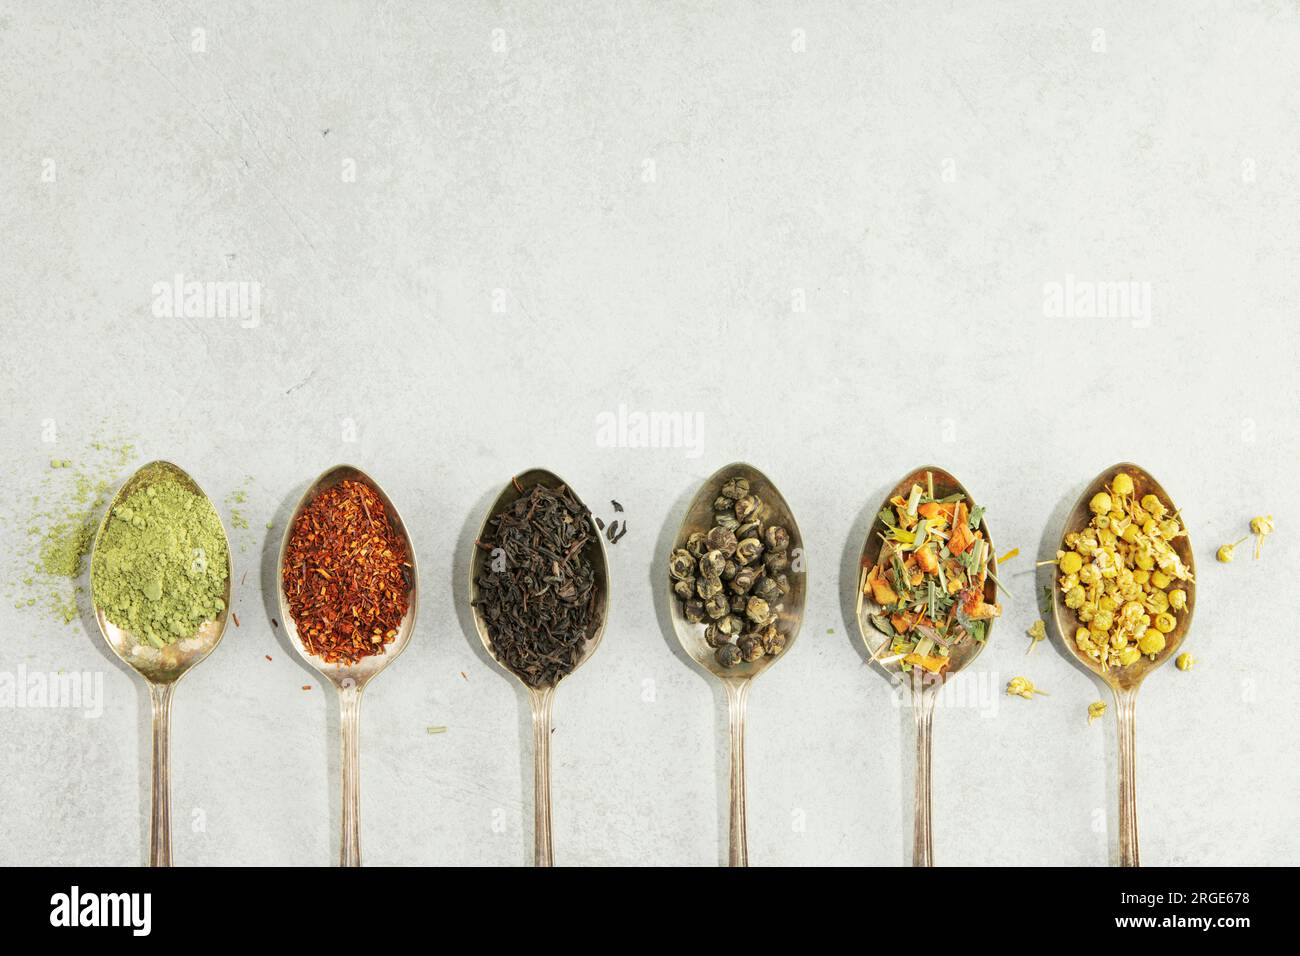 Different types of tea in vintage spoons. Flat lay, top view on concrete background. Matcha, rooibos, black, green, herbal mix and camomile tea. Copy Stock Photo